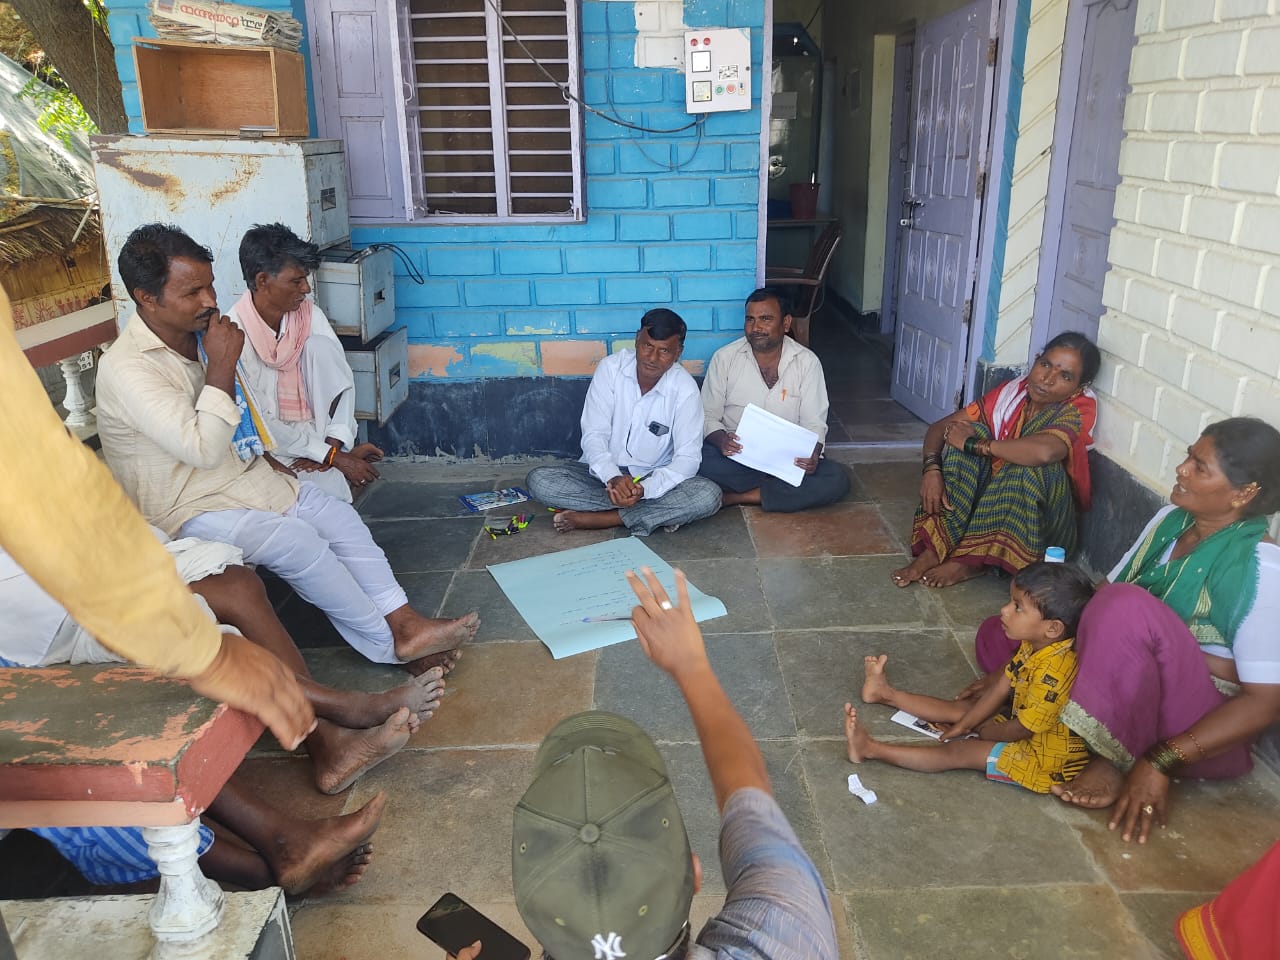 Farmer income workshop: One of the farmer group in active discussions about their plans for next agricultural season. Credit: Syamkrishna P. Aryan